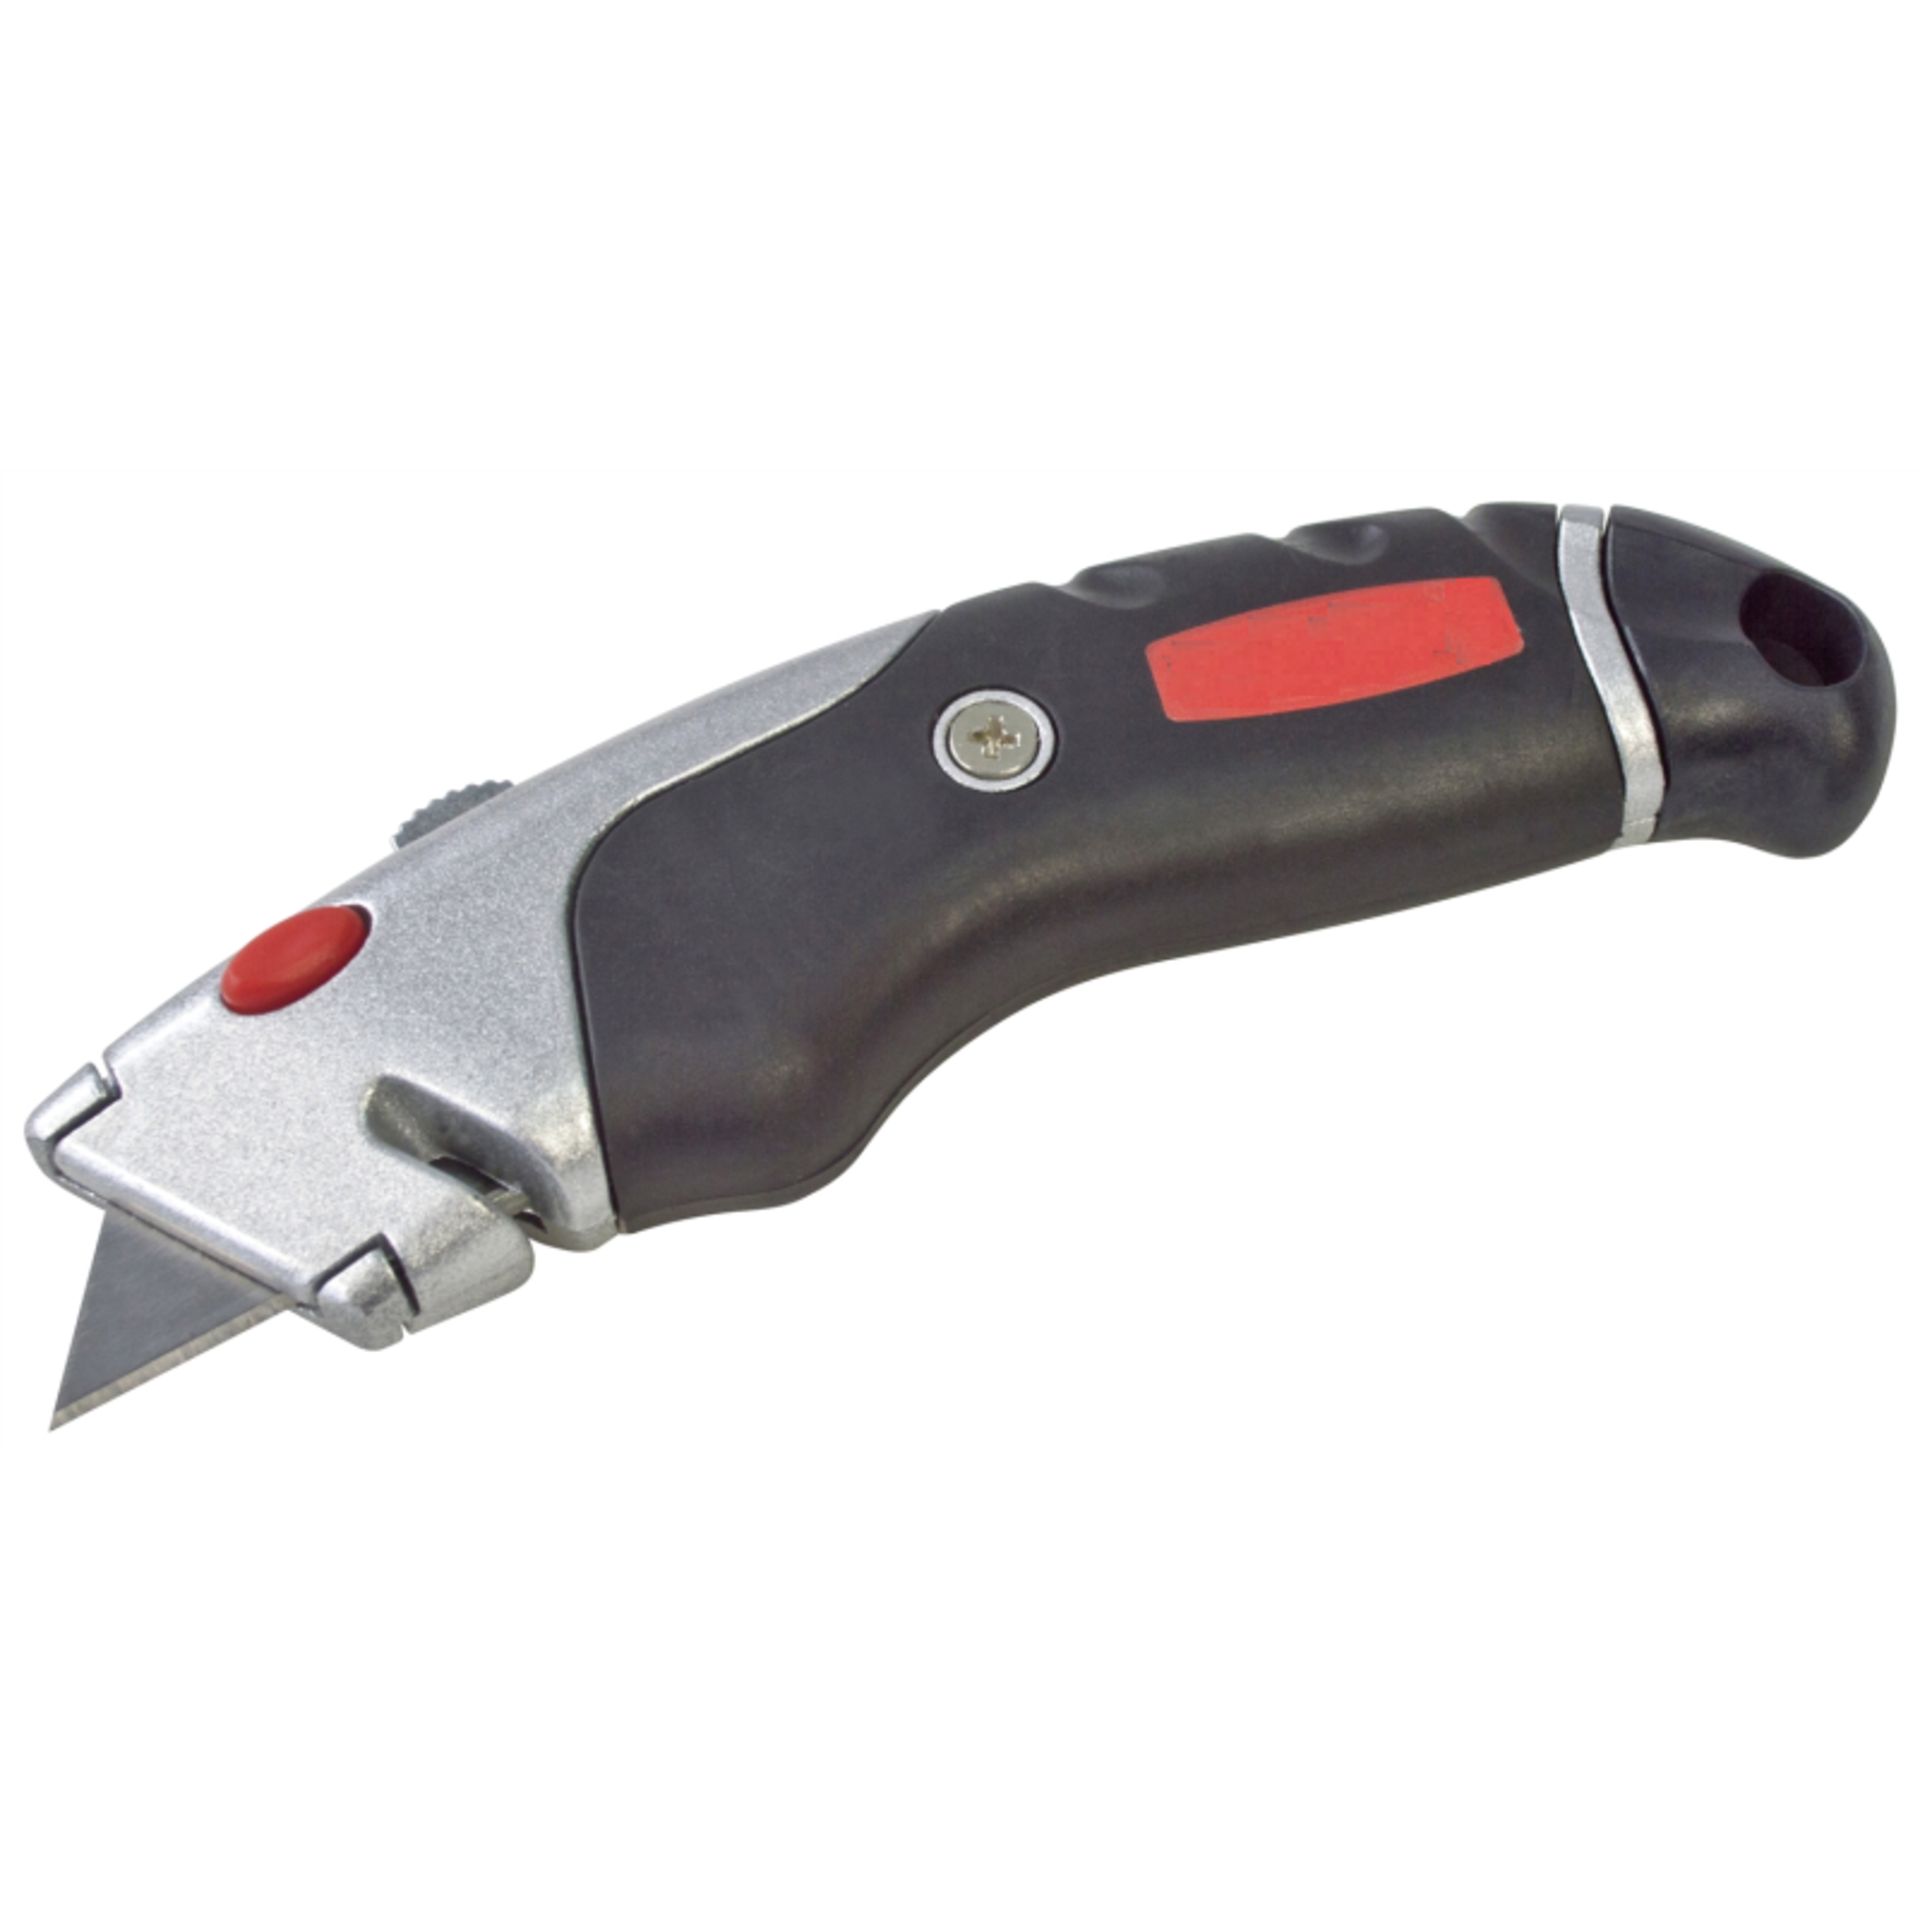 V Brand New Soft Grip Retractable Utility Knife X 2 YOUR BID PRICE TO BE MULTIPLIED BY TWO